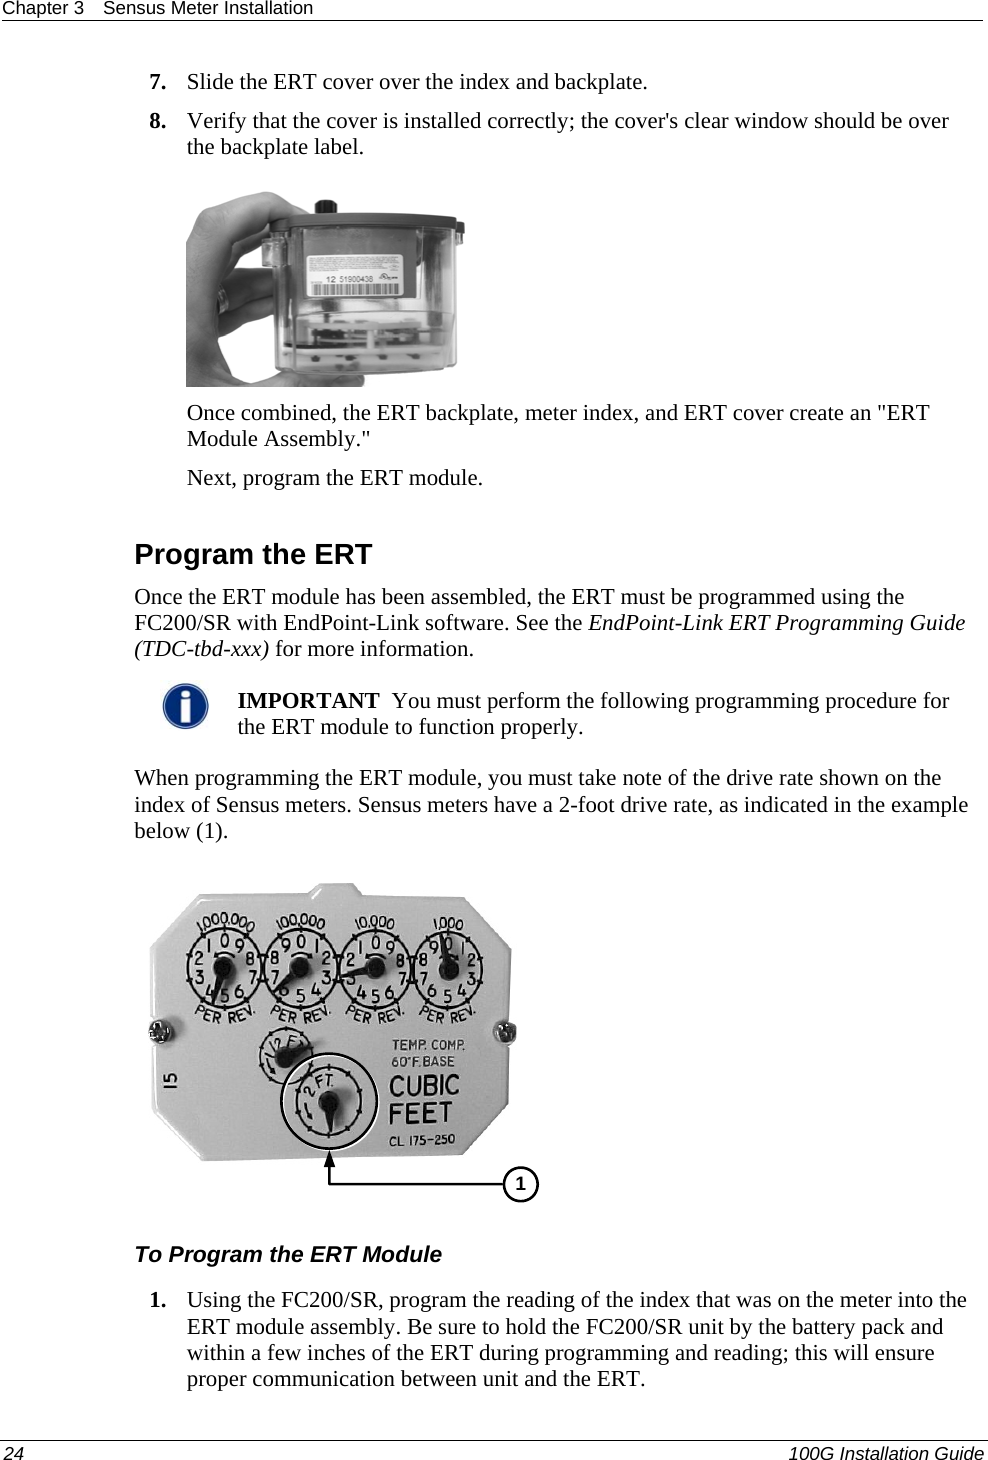 Chapter 3  Sensus Meter Installation  7. Slide the ERT cover over the index and backplate.  8. Verify that the cover is installed correctly; the cover&apos;s clear window should be over the backplate label.   Once combined, the ERT backplate, meter index, and ERT cover create an &quot;ERT Module Assembly.&quot;  Next, program the ERT module.   Program the ERT Once the ERT module has been assembled, the ERT must be programmed using the FC200/SR with EndPoint-Link software. See the EndPoint-Link ERT Programming Guide (TDC-tbd-xxx) for more information.    IMPORTANT  You must perform the following programming procedure for the ERT module to function properly.  When programming the ERT module, you must take note of the drive rate shown on the index of Sensus meters. Sensus meters have a 2-foot drive rate, as indicated in the example below (1).   1 To Program the ERT Module 1. Using the FC200/SR, program the reading of the index that was on the meter into the ERT module assembly. Be sure to hold the FC200/SR unit by the battery pack and within a few inches of the ERT during programming and reading; this will ensure proper communication between unit and the ERT.  24   100G Installation Guide  